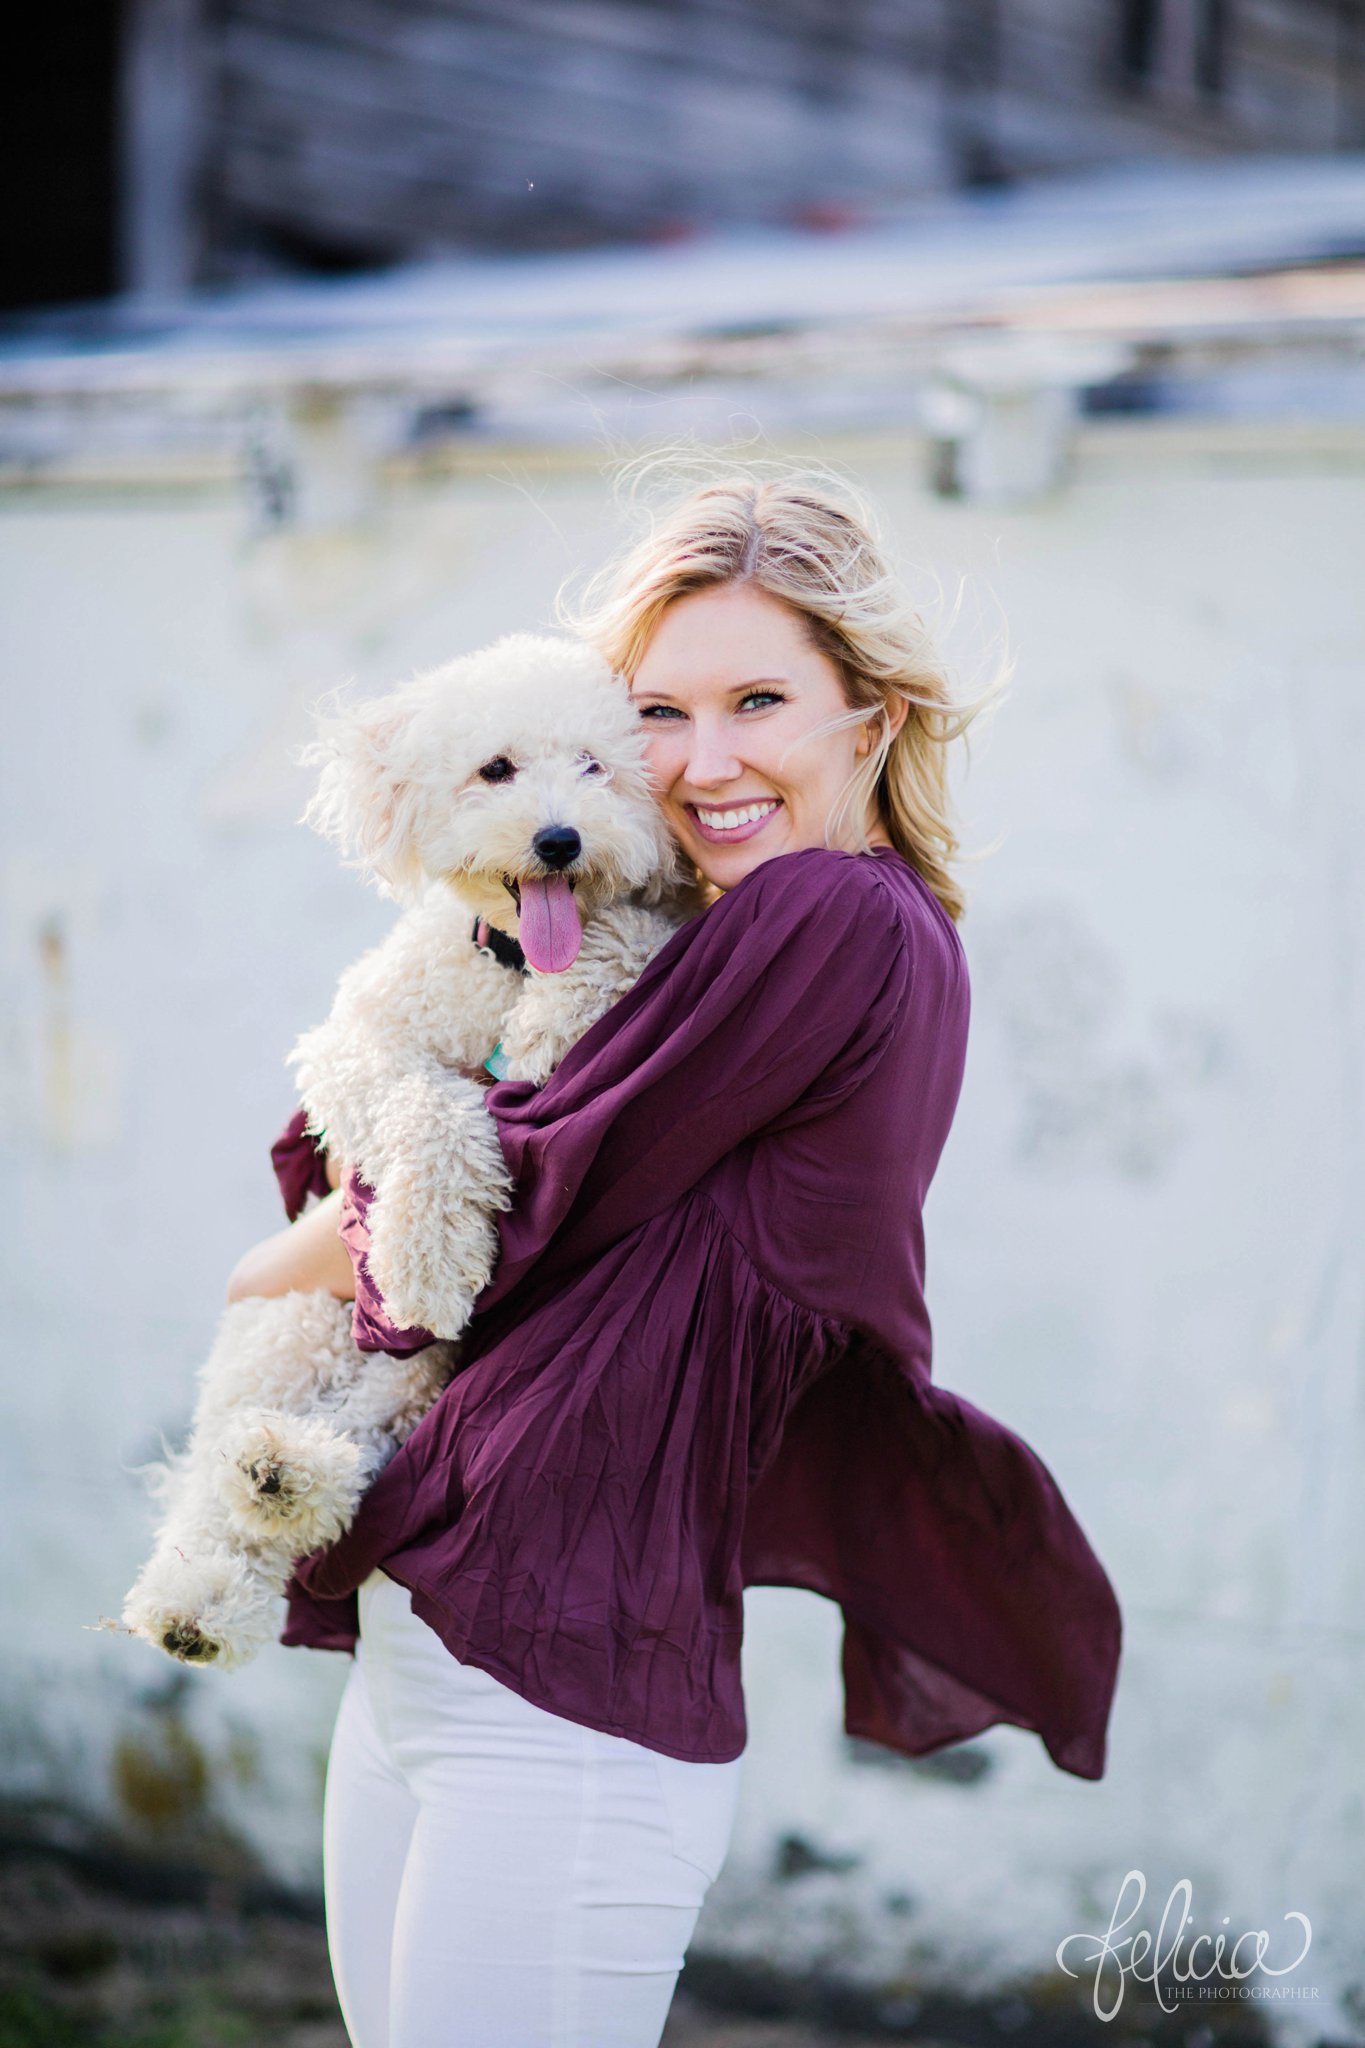 Sunrise Engagement Photos | Felicia The Photographer | textured background | girl with puppy